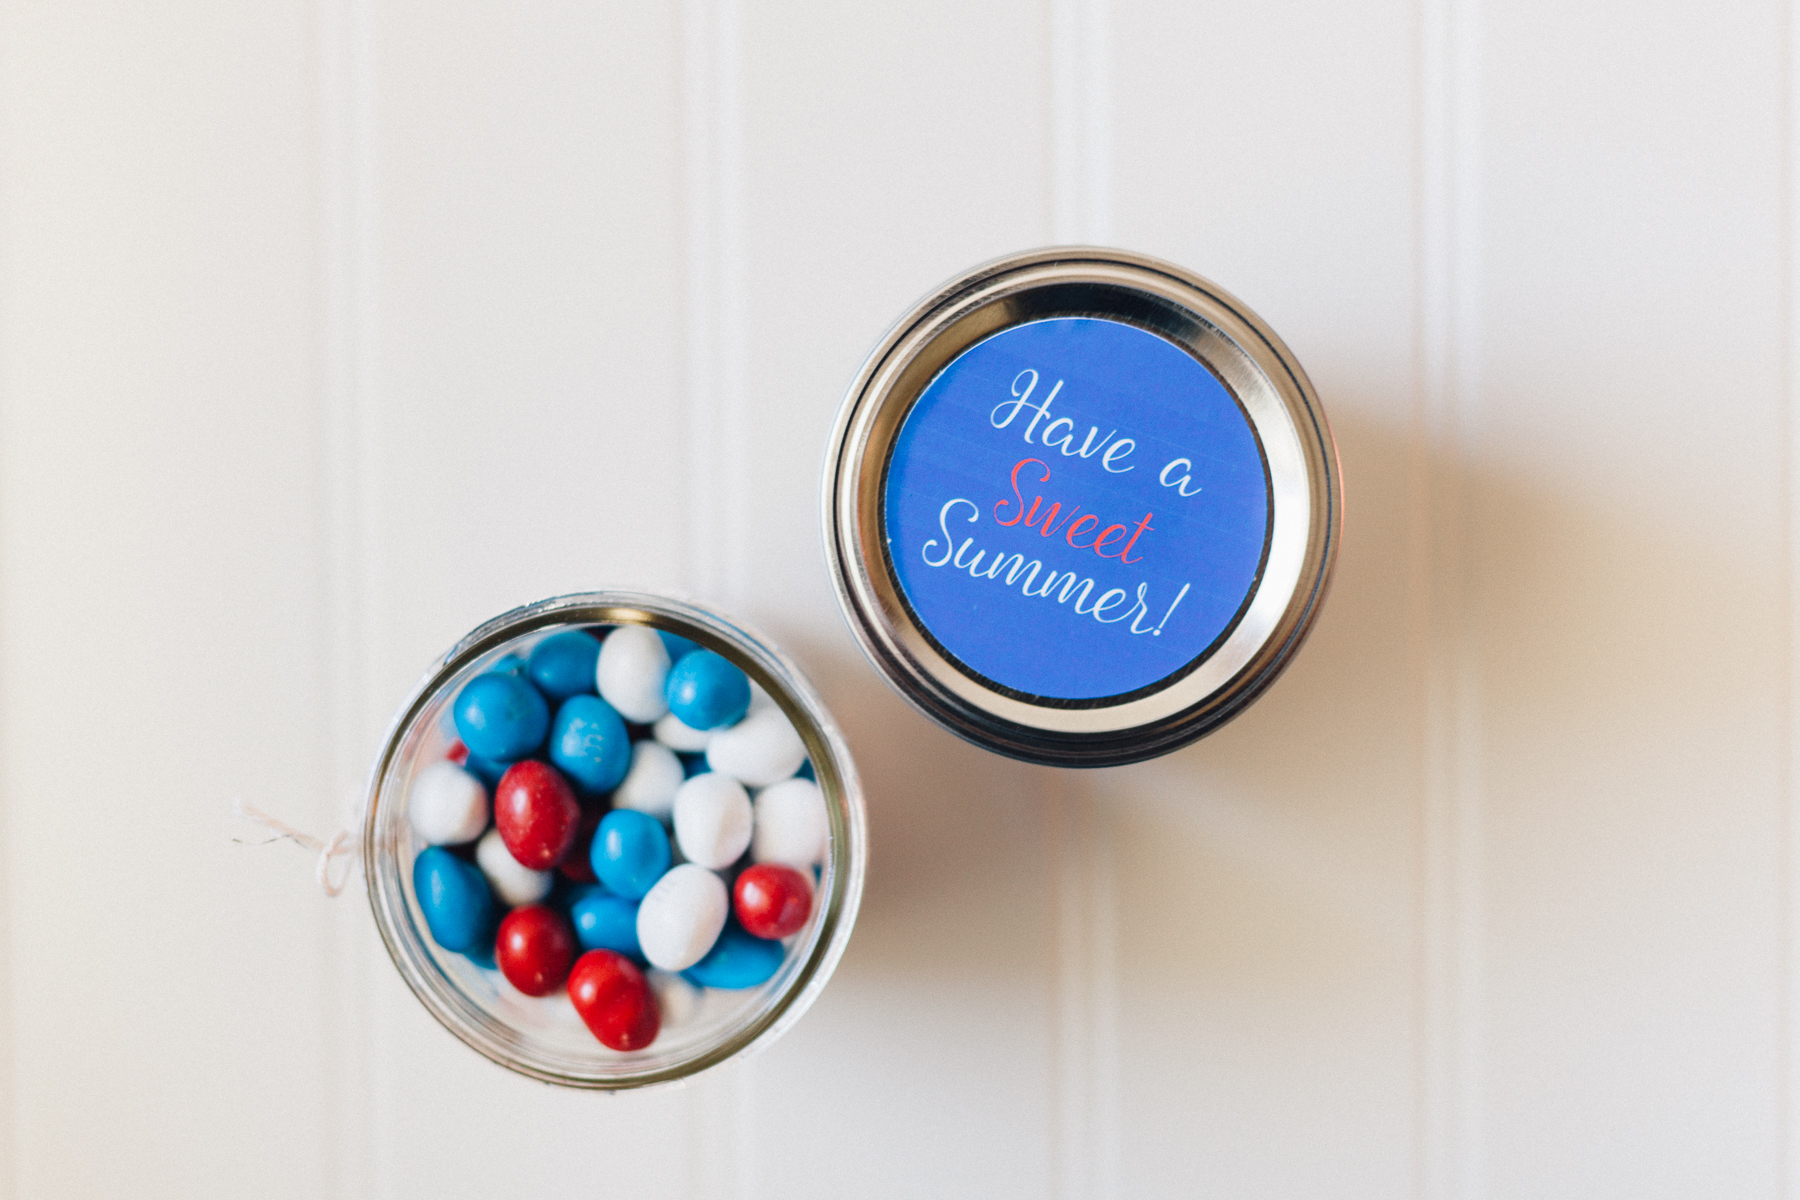 Ready to send sweet summer wishes to your loved ones? This FREE printable turns a mason jar an excellent gift! | Alyssa & Carla